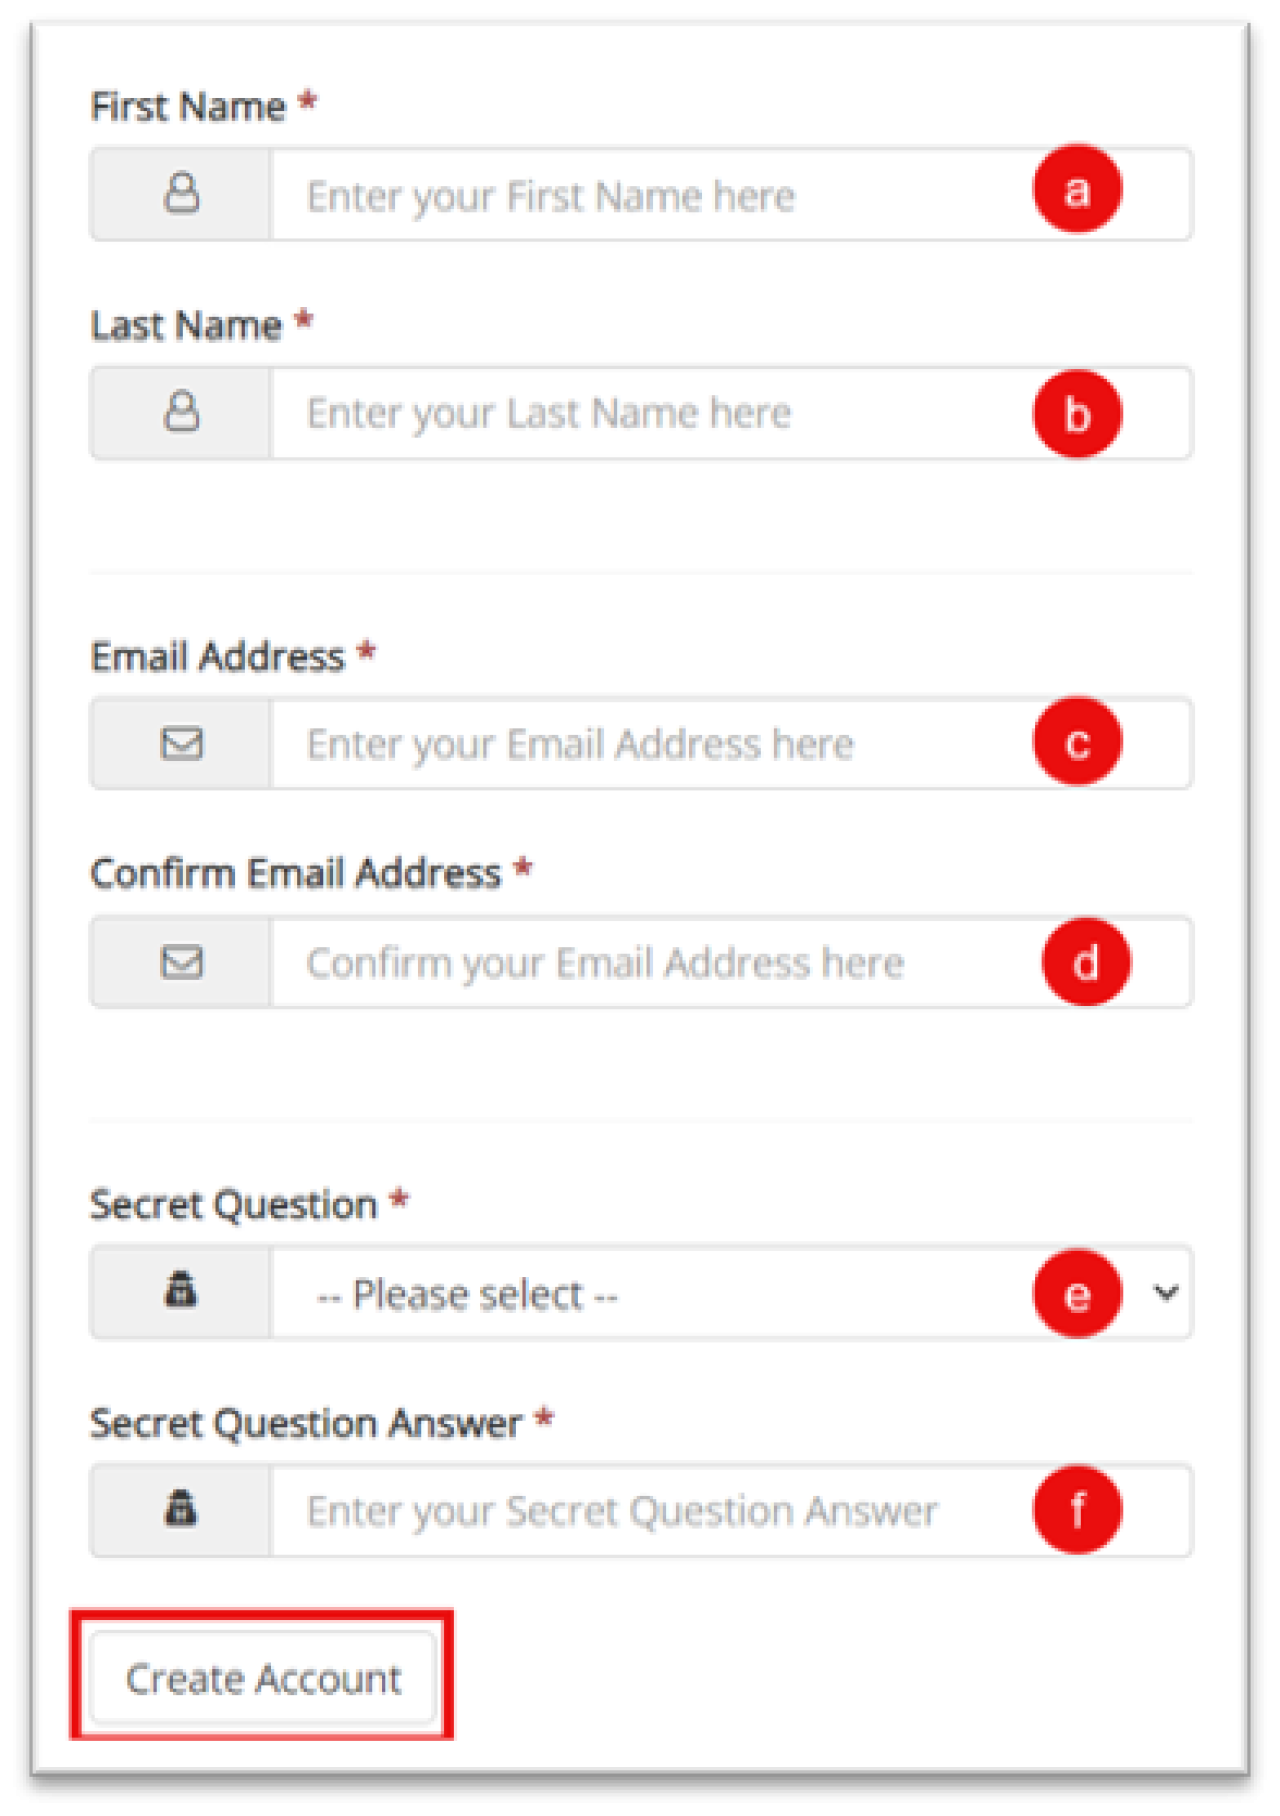 Screenshot of Dynamic Forms showing the required fields for creating a new account: first name, last name, email address, confirm email address, secret question, and secret question answer.